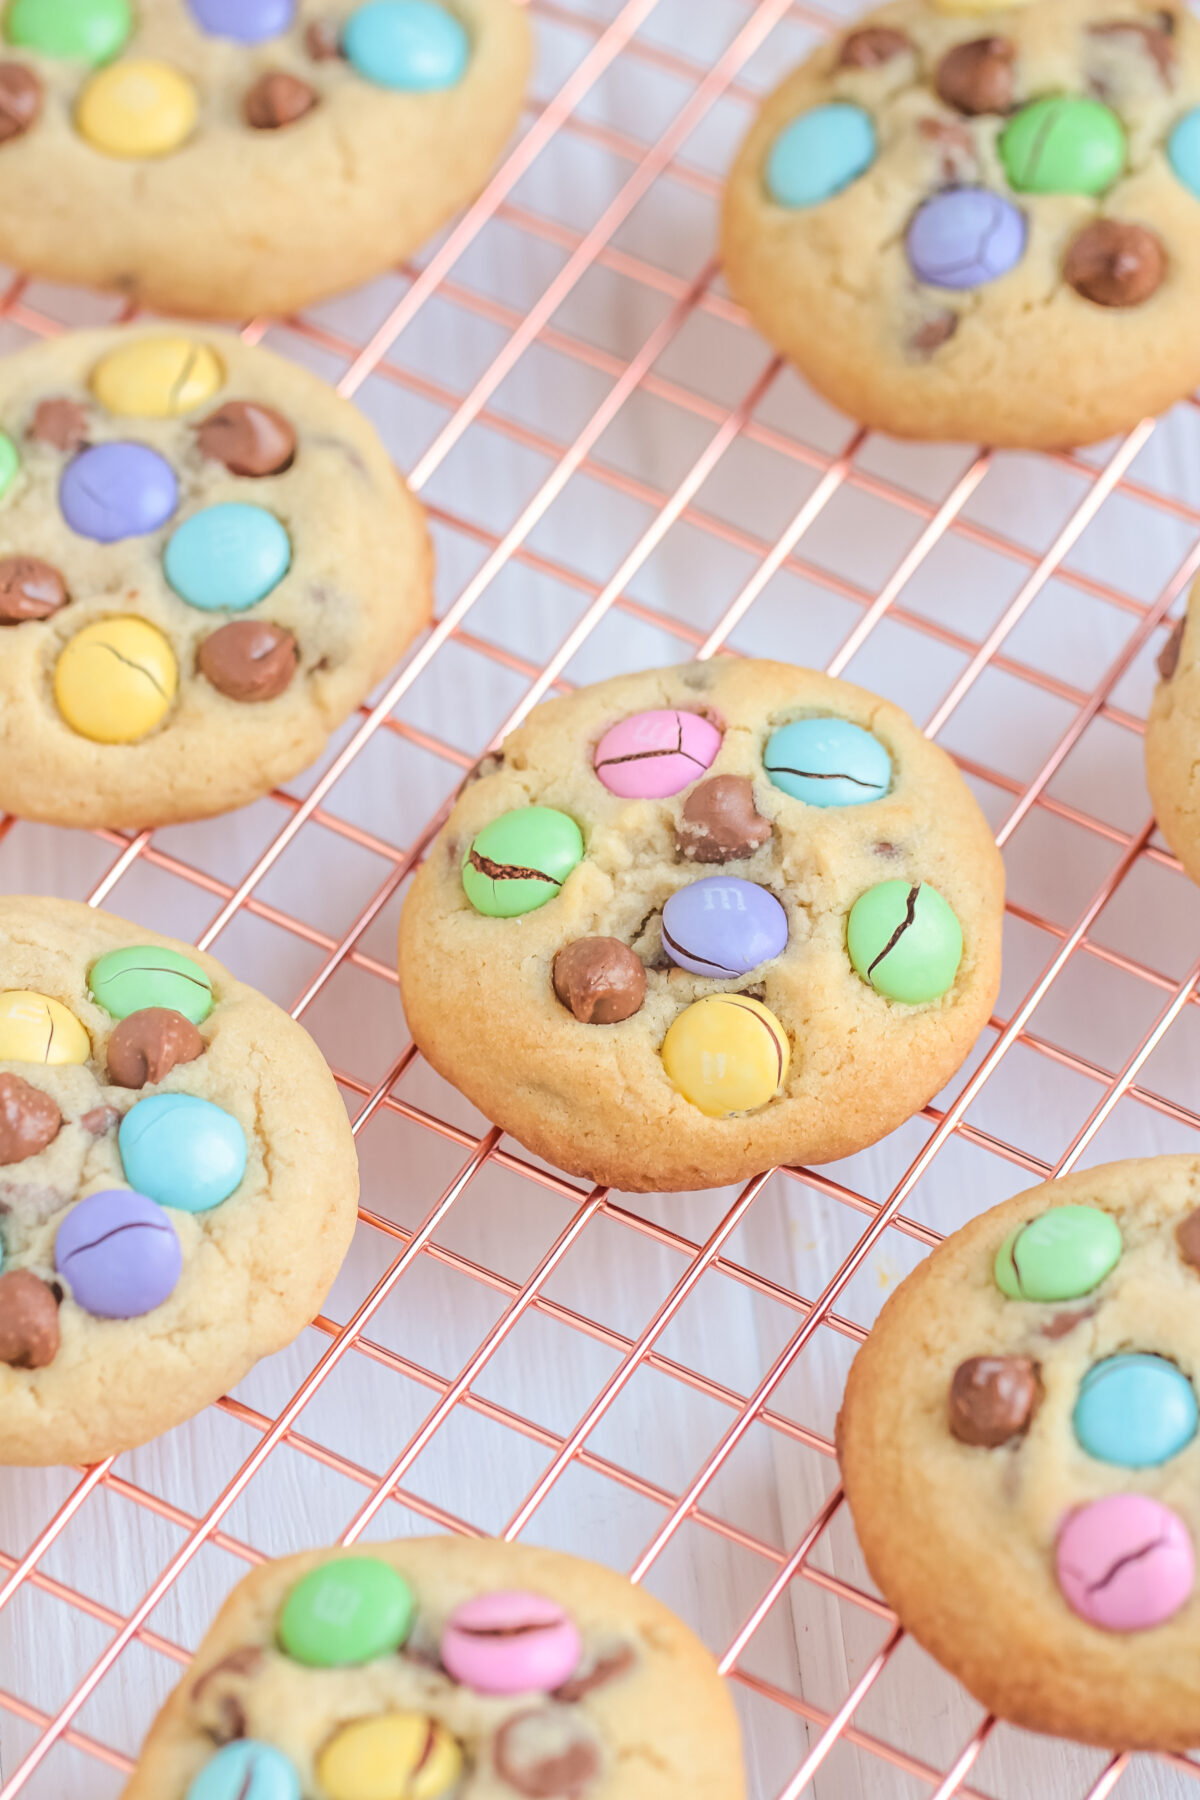 Celebrate Easter with these delicious and festive Easter chocolate chip cookies! These Easter cookies are soft and loaded with chocolate!